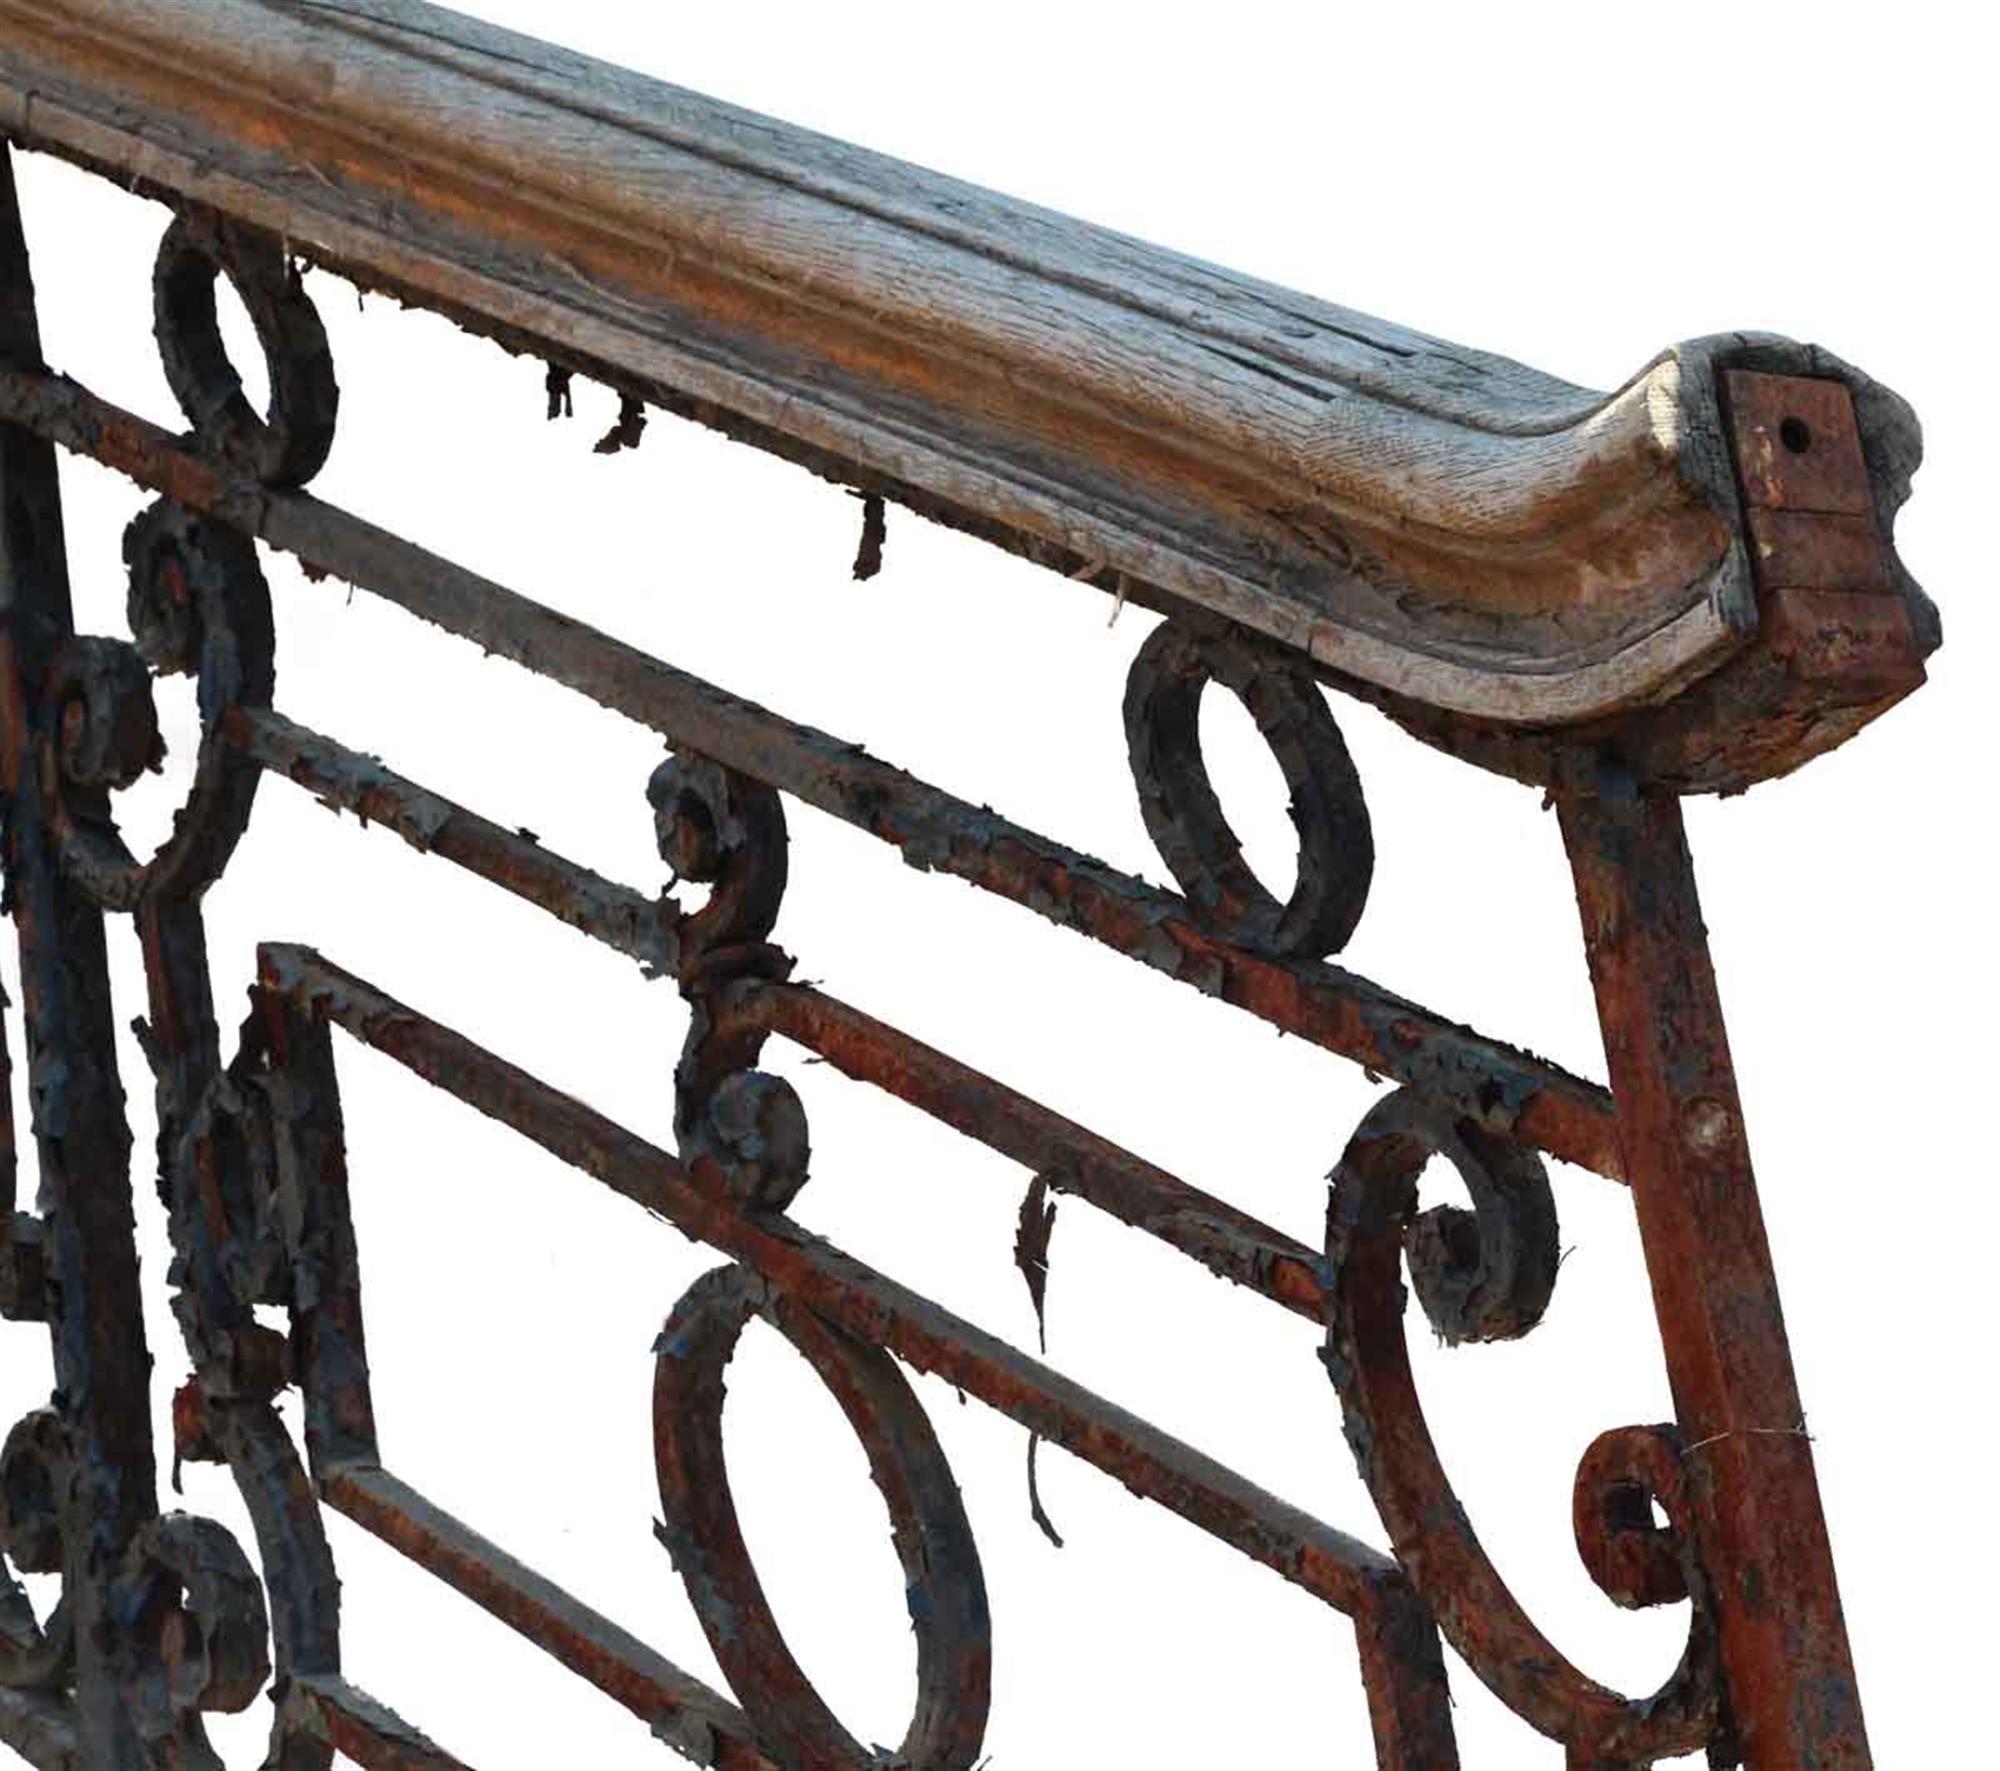 1900s heavy wrought iron ornate Victorian stair railing with several landing pieces. There are eleven runs of the stair railing in the lengths listed below and seven balcony landing railings in the sizes listed below. The total linear footage is 100